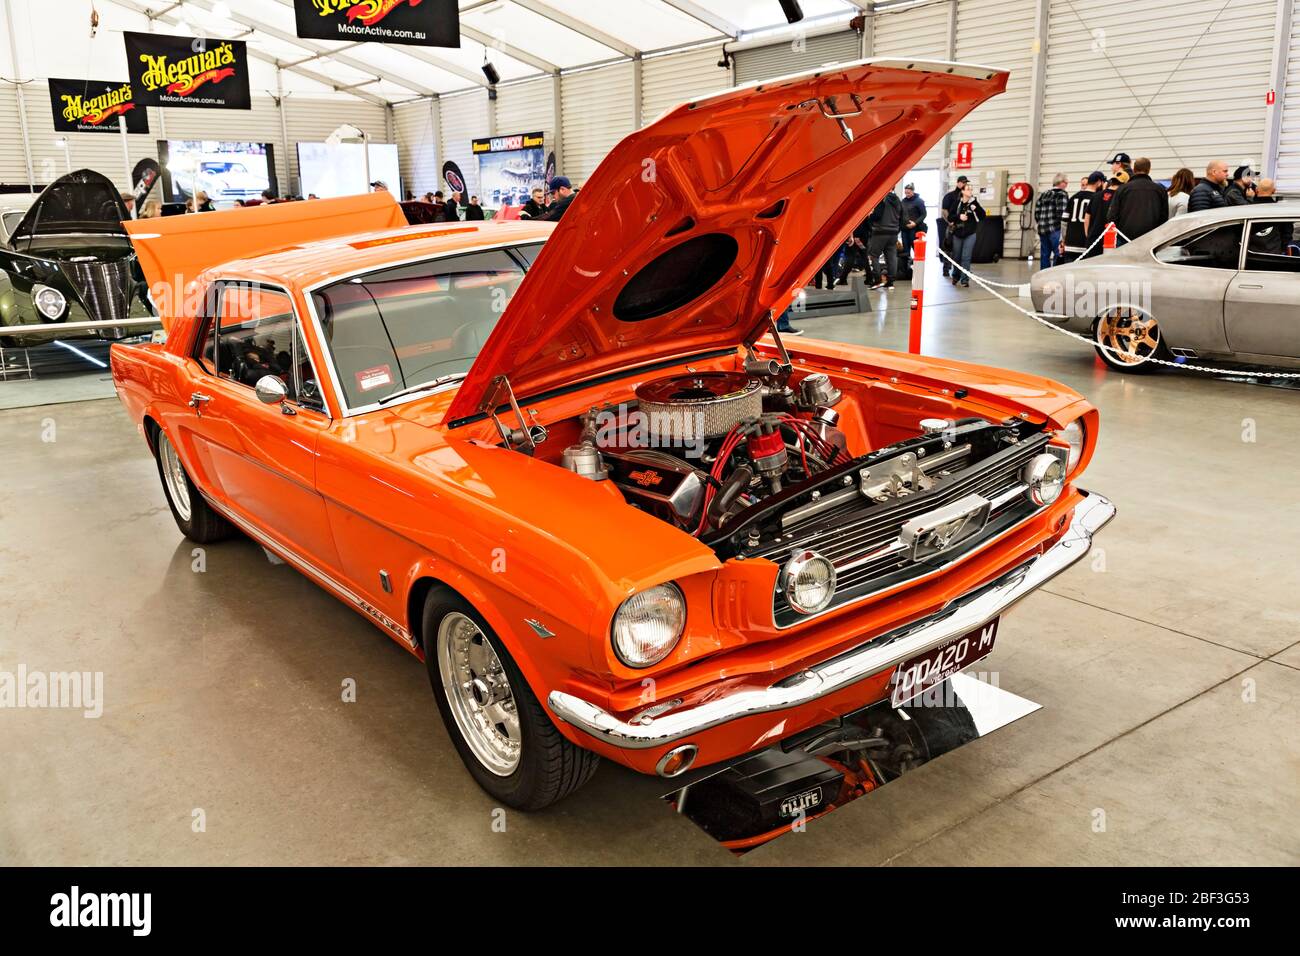 Automobiles /   American made 1960's Ford GT Mustang displayed at a motor show in Melbourne Victoria Australia. Stock Photo